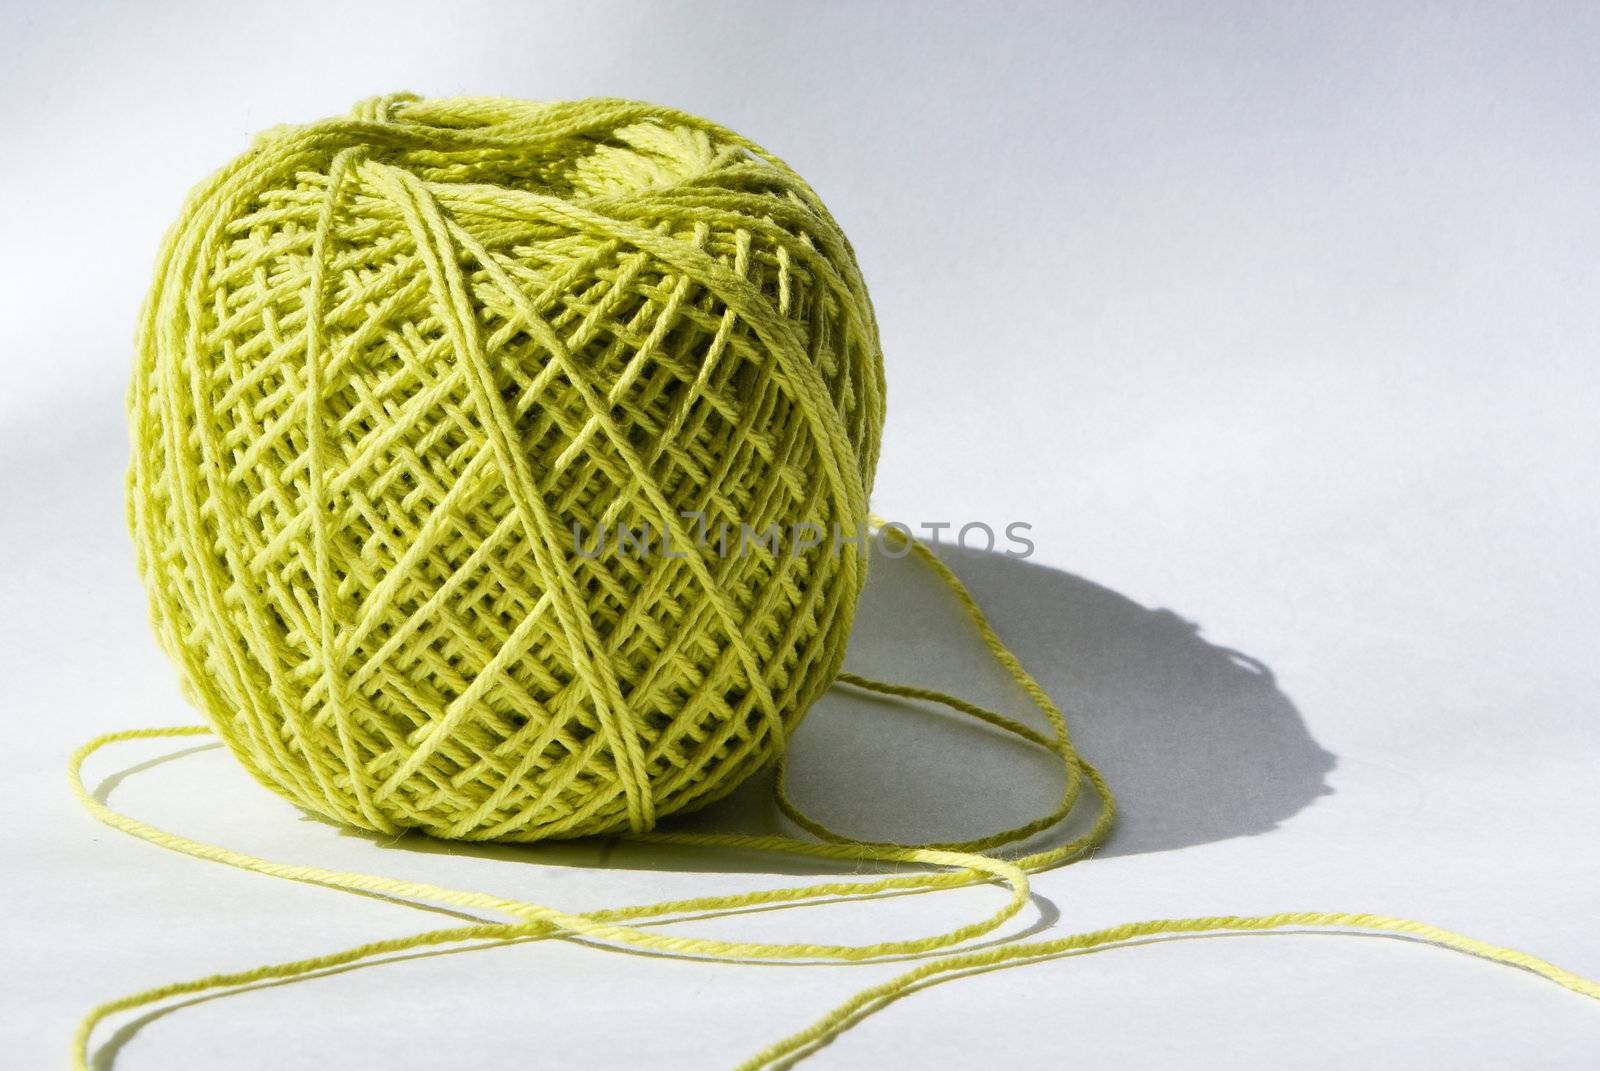 knot of green yarn against light background